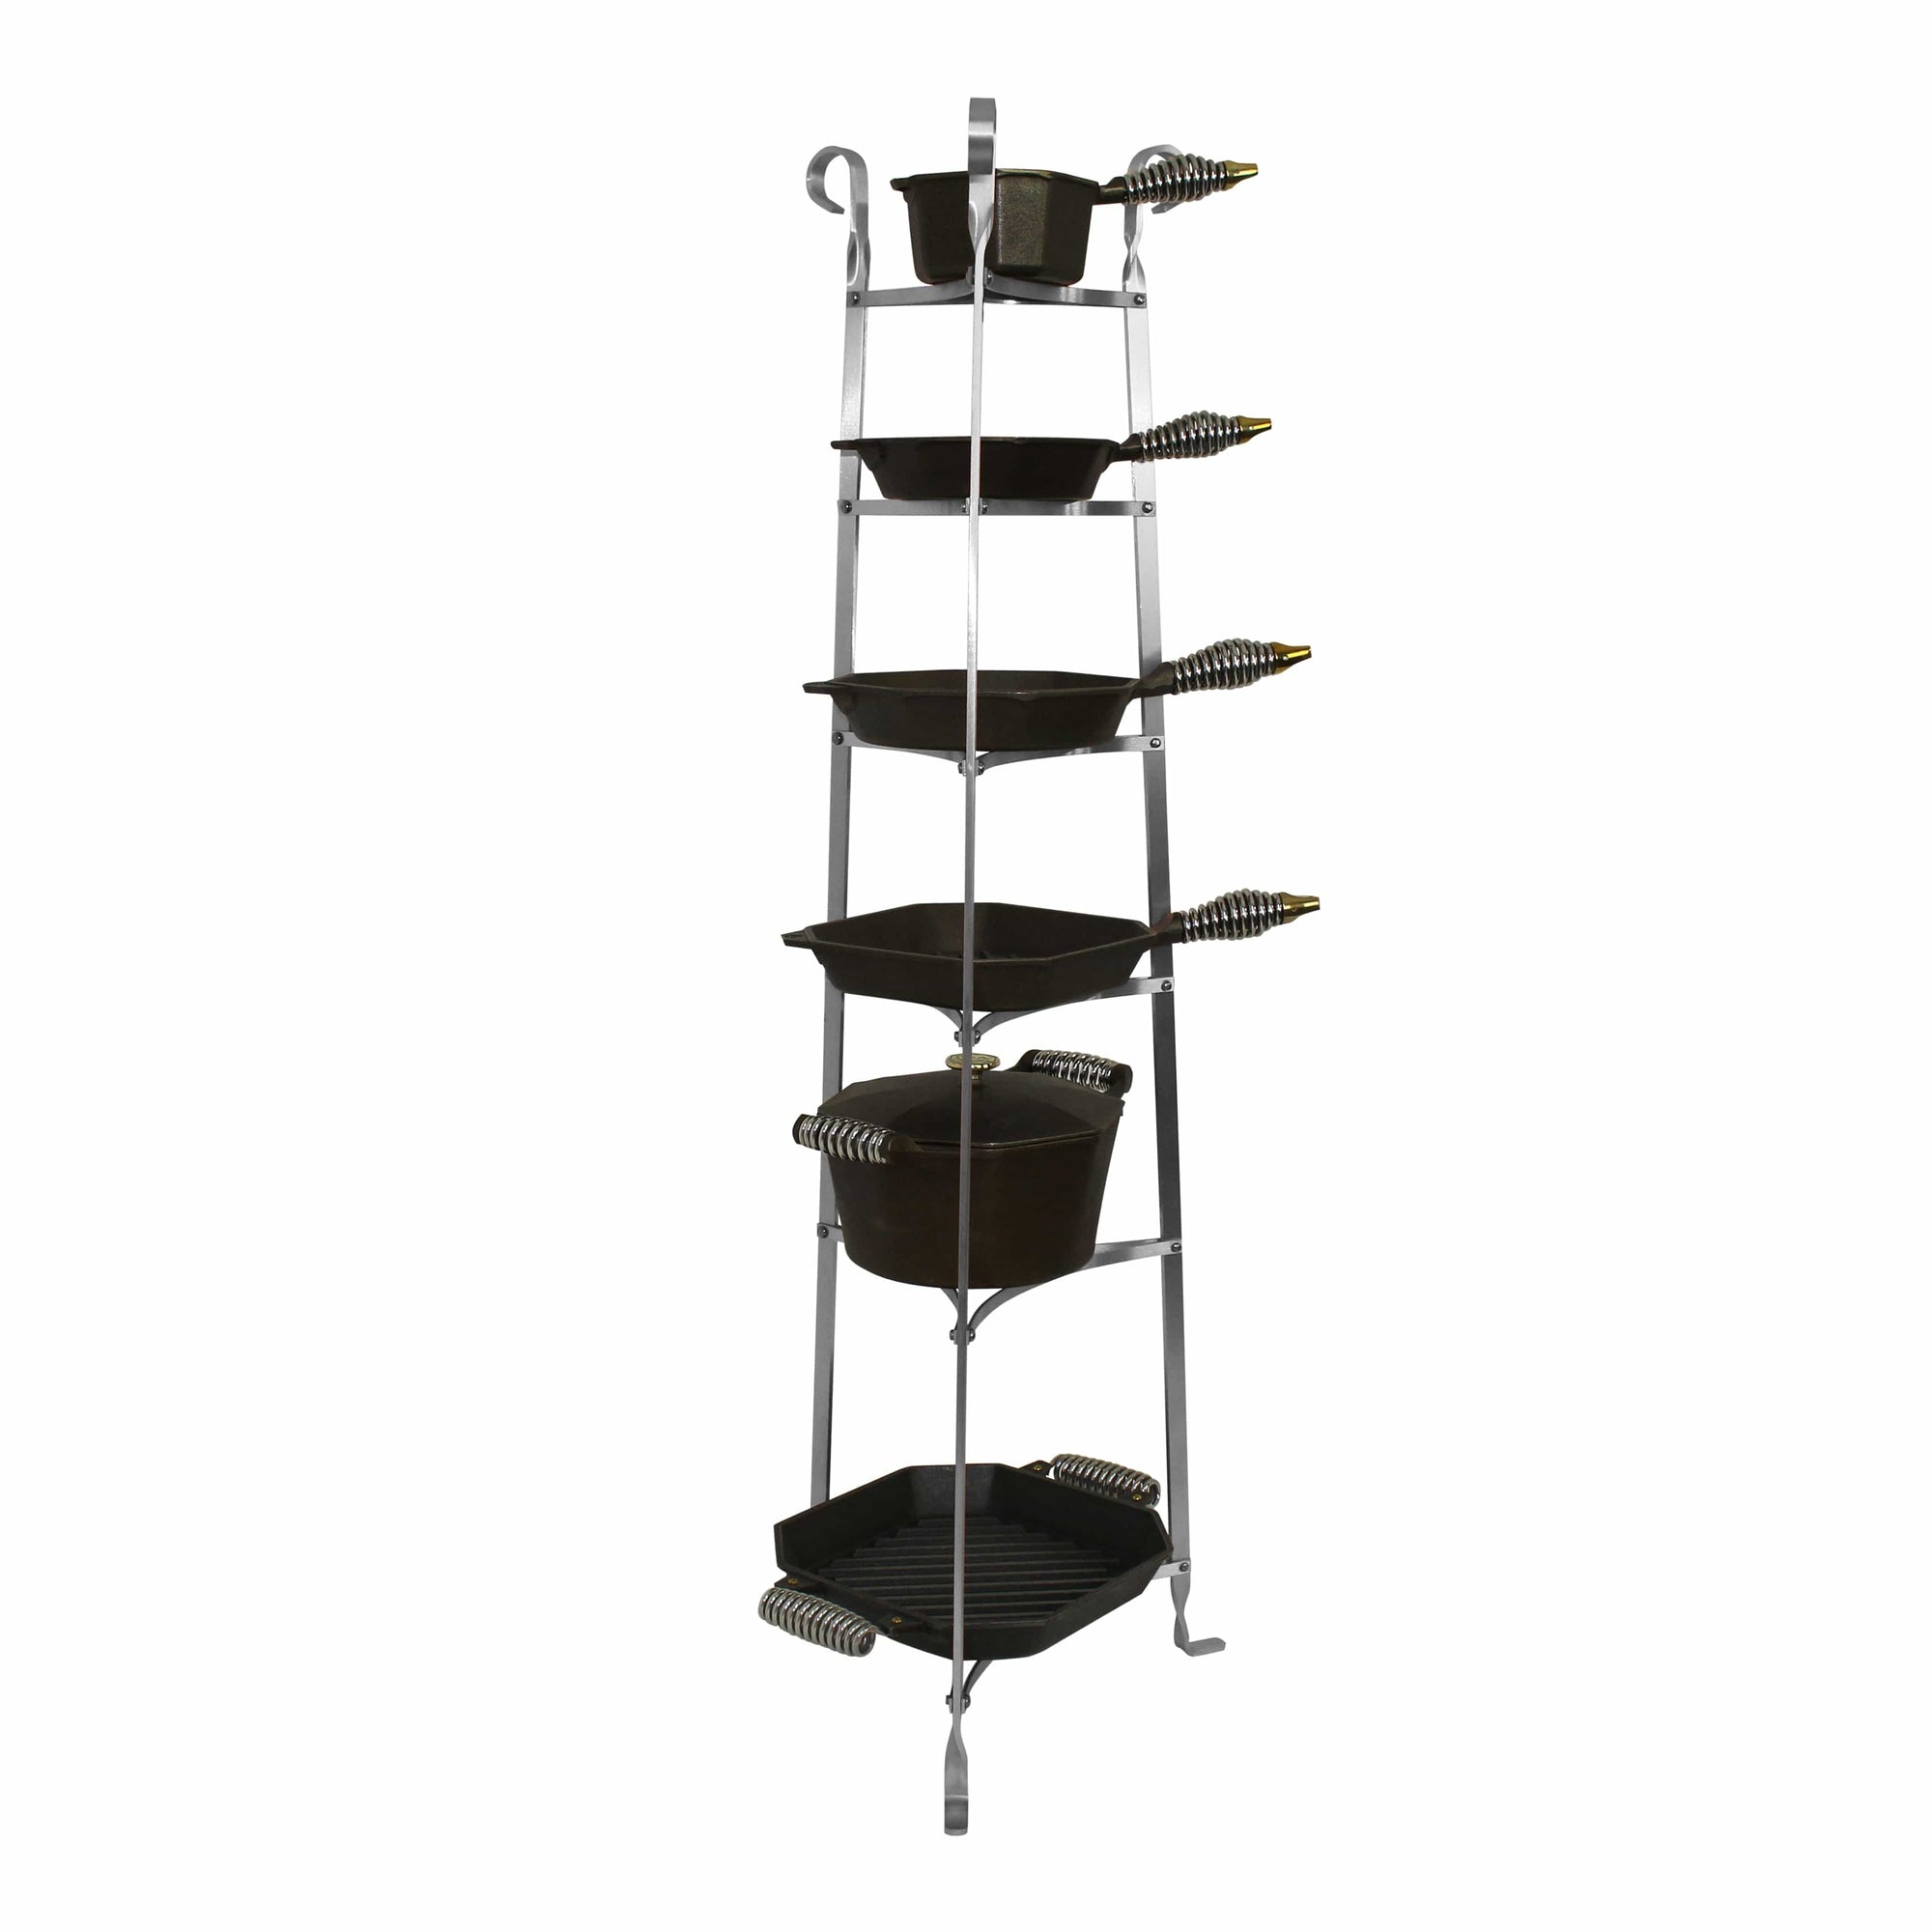 Enclume USA Handcrafted Gourmet 6 Tier Cookware Stand, Black